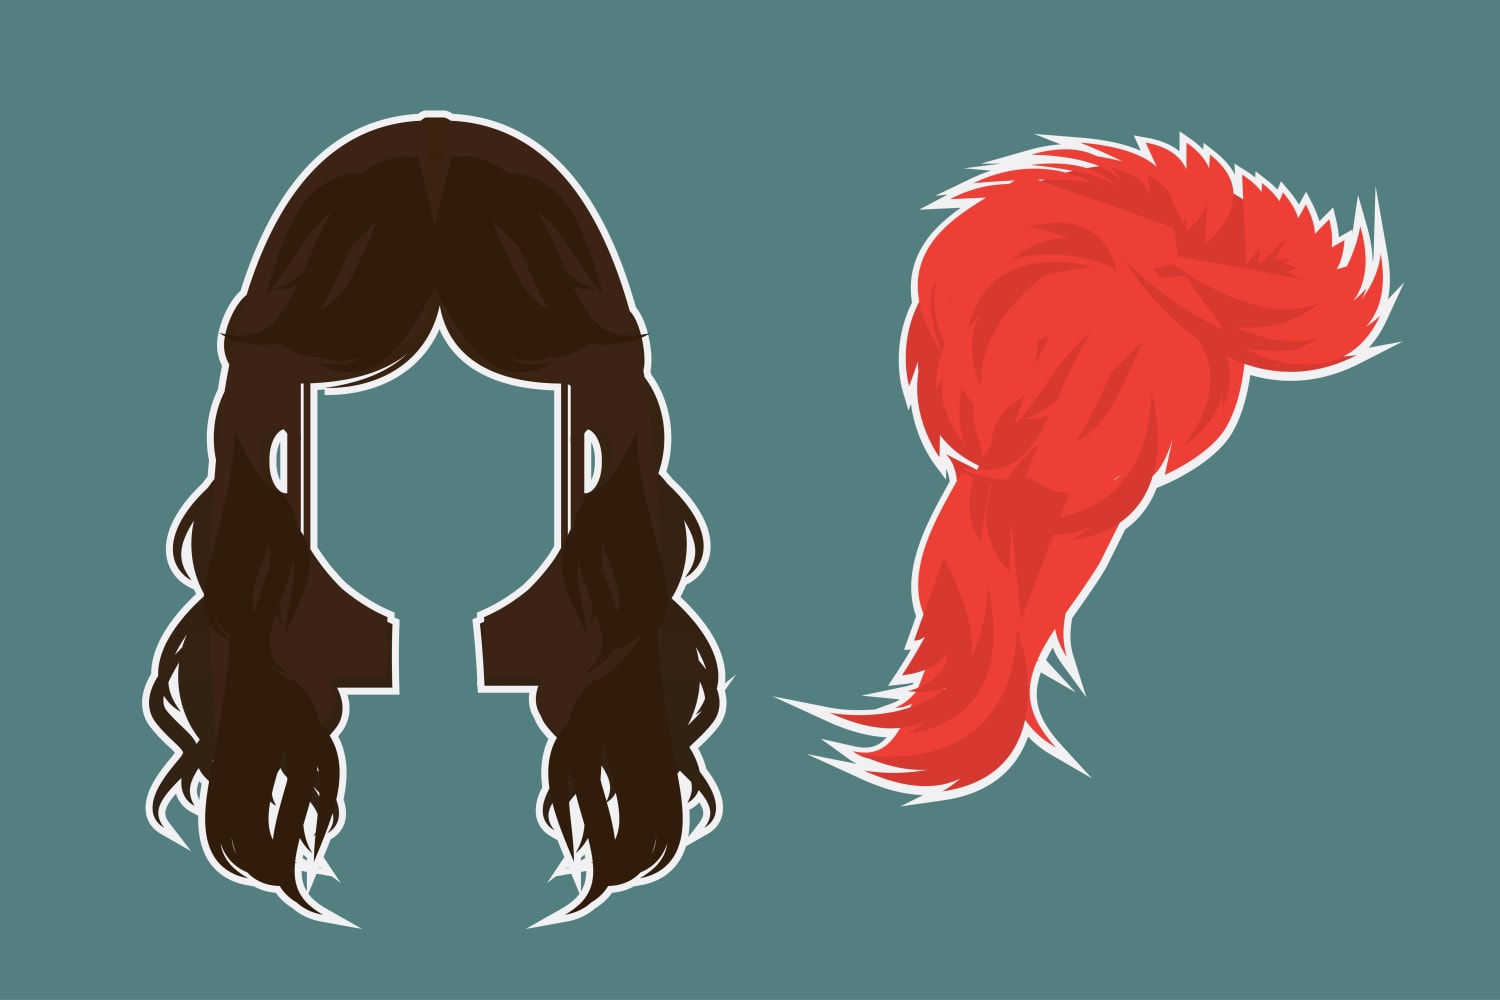 Illustrated evolution of rock n roll hairstyles +list+